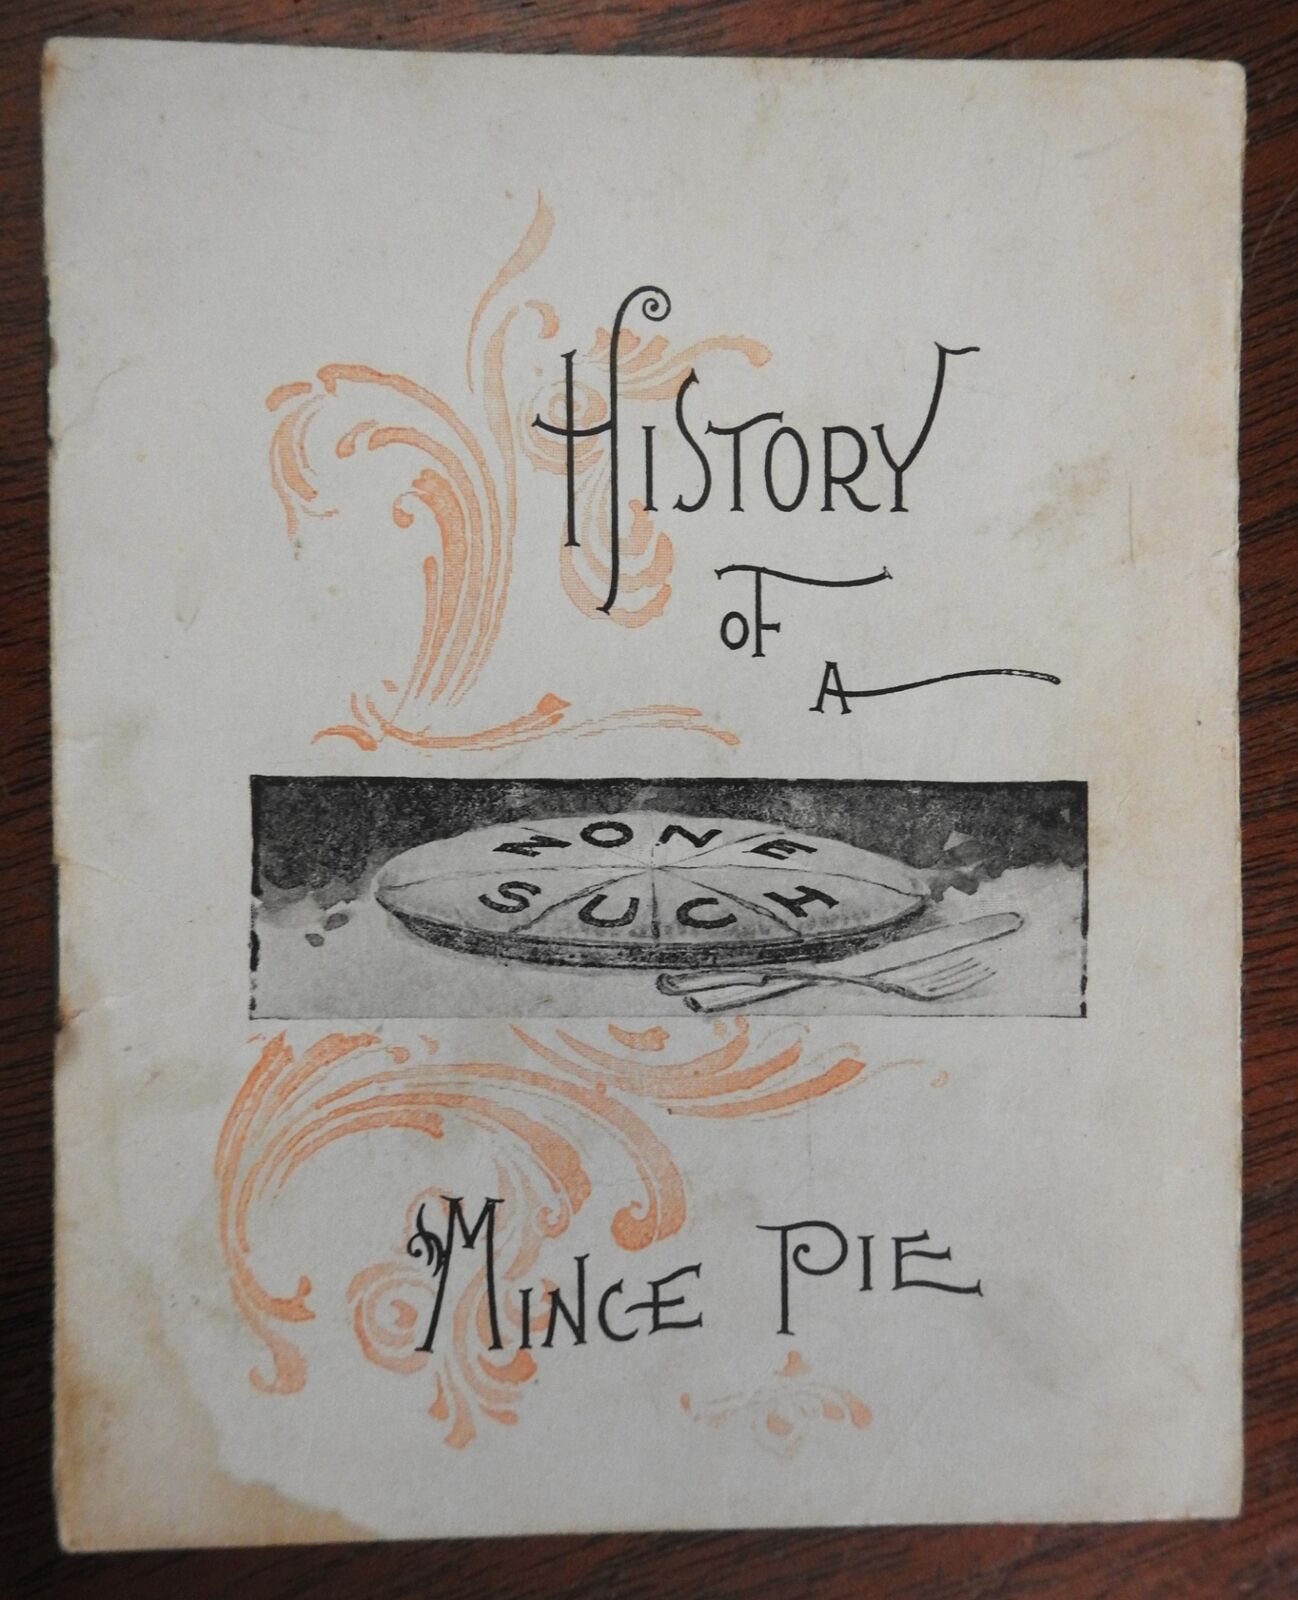 Cookery History of a Mince Pie c. 1890s American juvenile advertising booklet